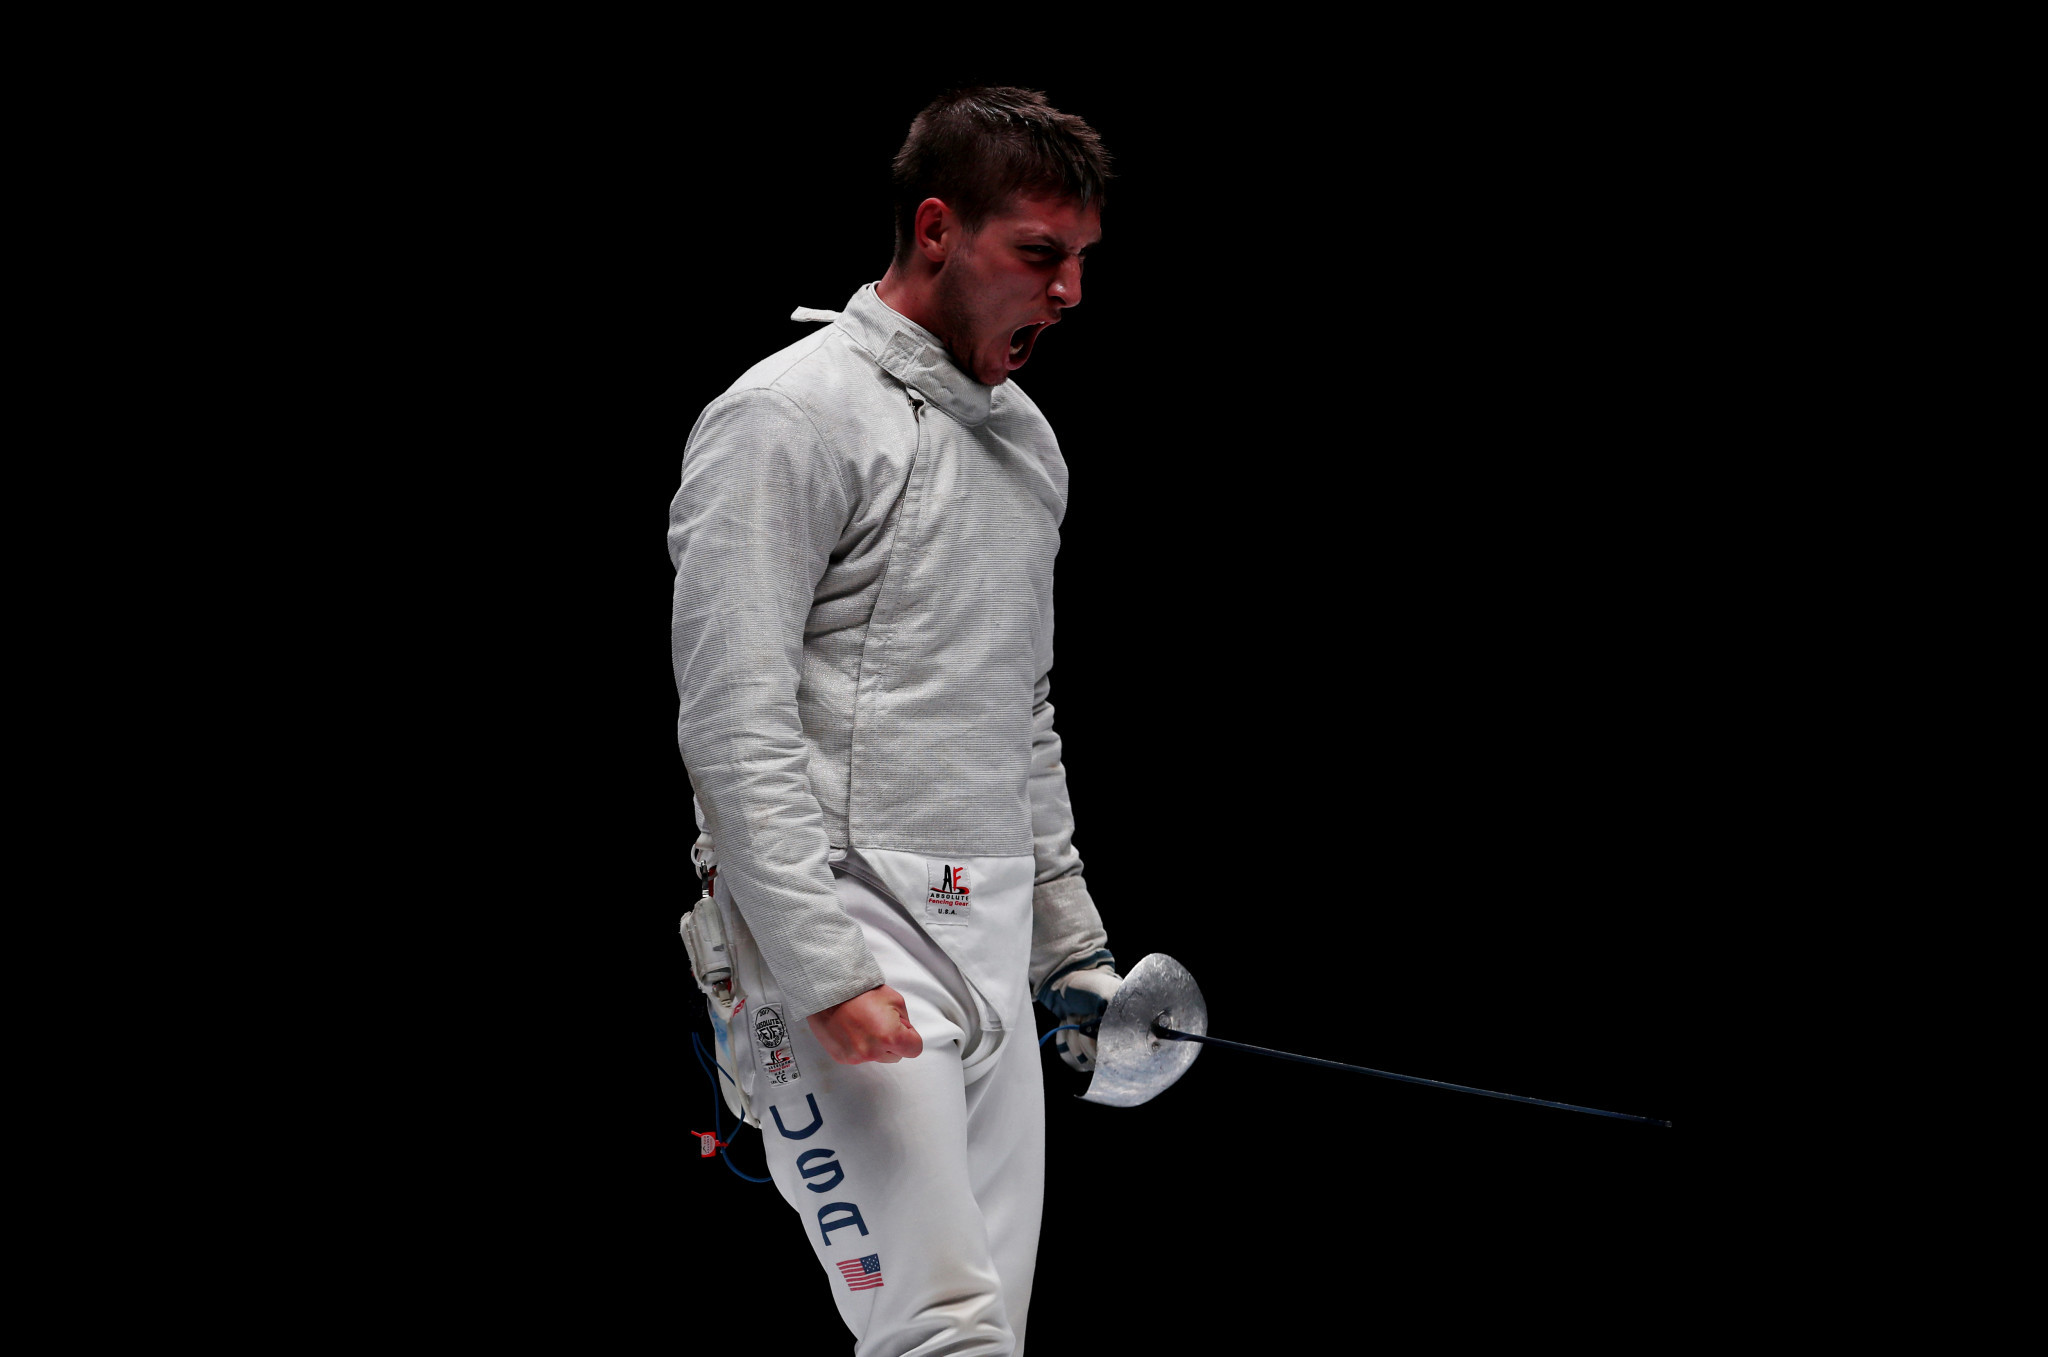 Eli Dershwitz won the men's sabre on a successful opening day for the United States at the Pan American Fencing Championships in Toronto ©Getty Images